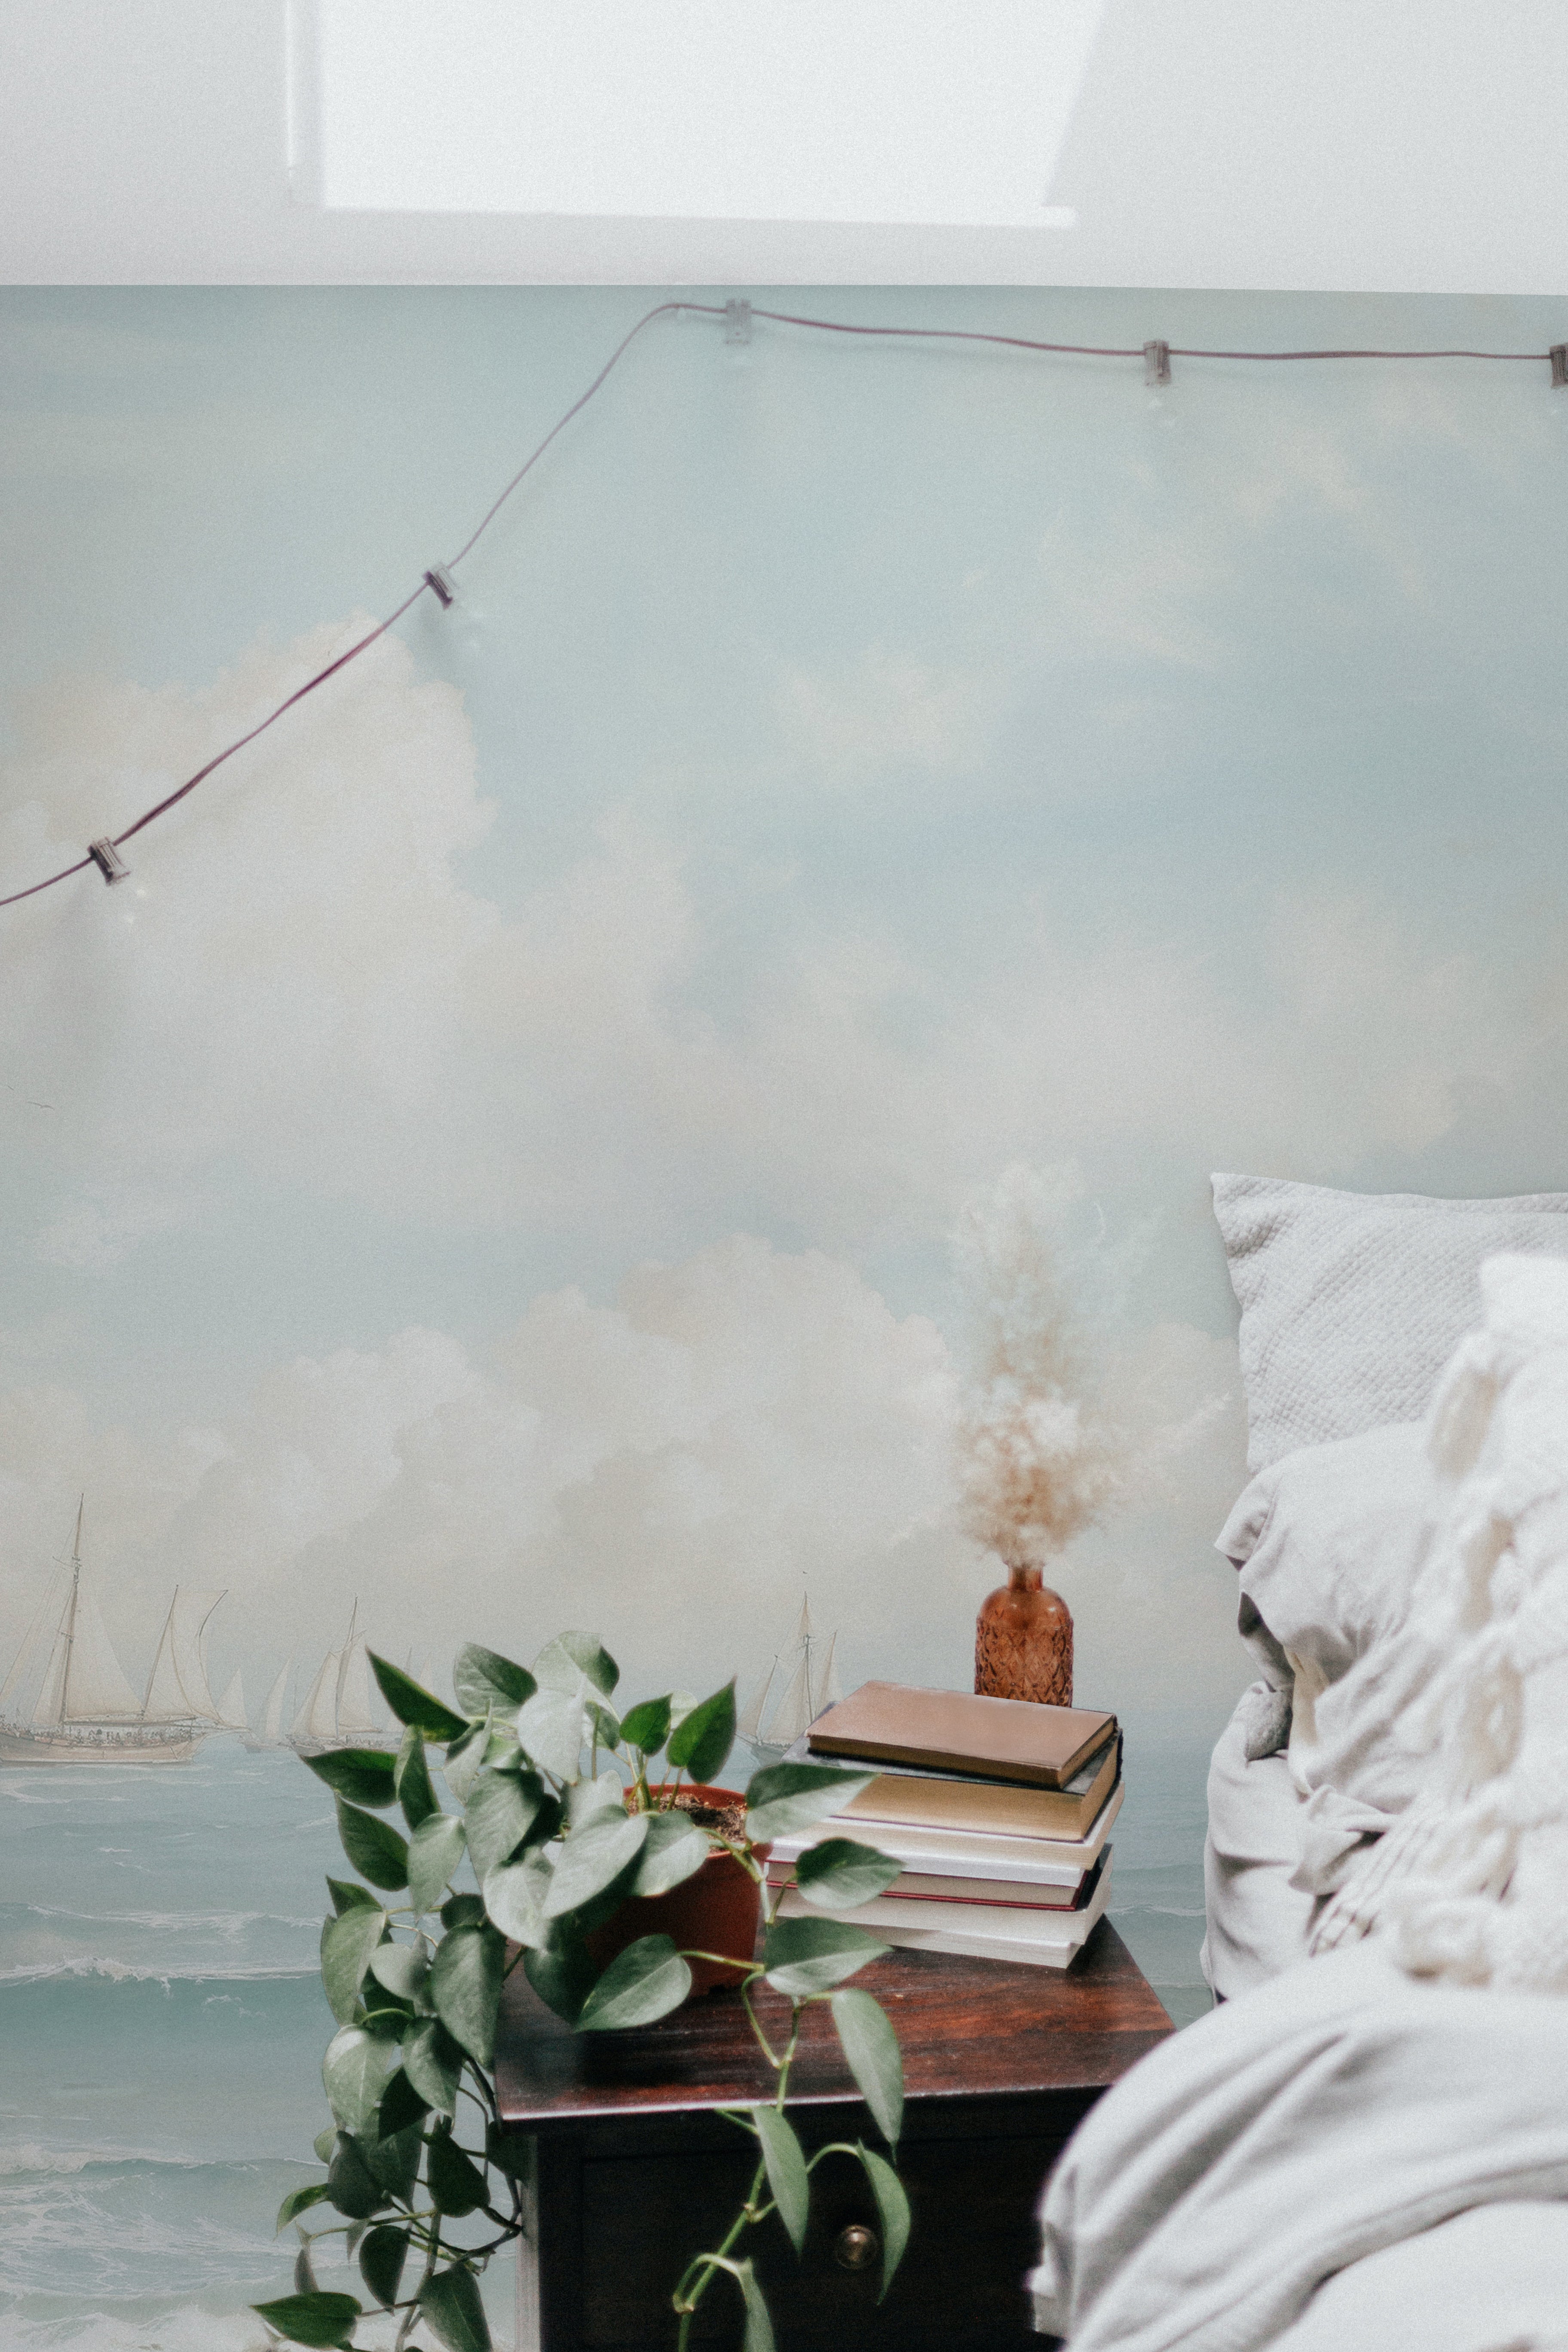 A cozy corner of a room with a detailed seascape wall mural displaying sailboats. The setting includes a side table with books and a plant, next to a bed adorned with light-colored linens.